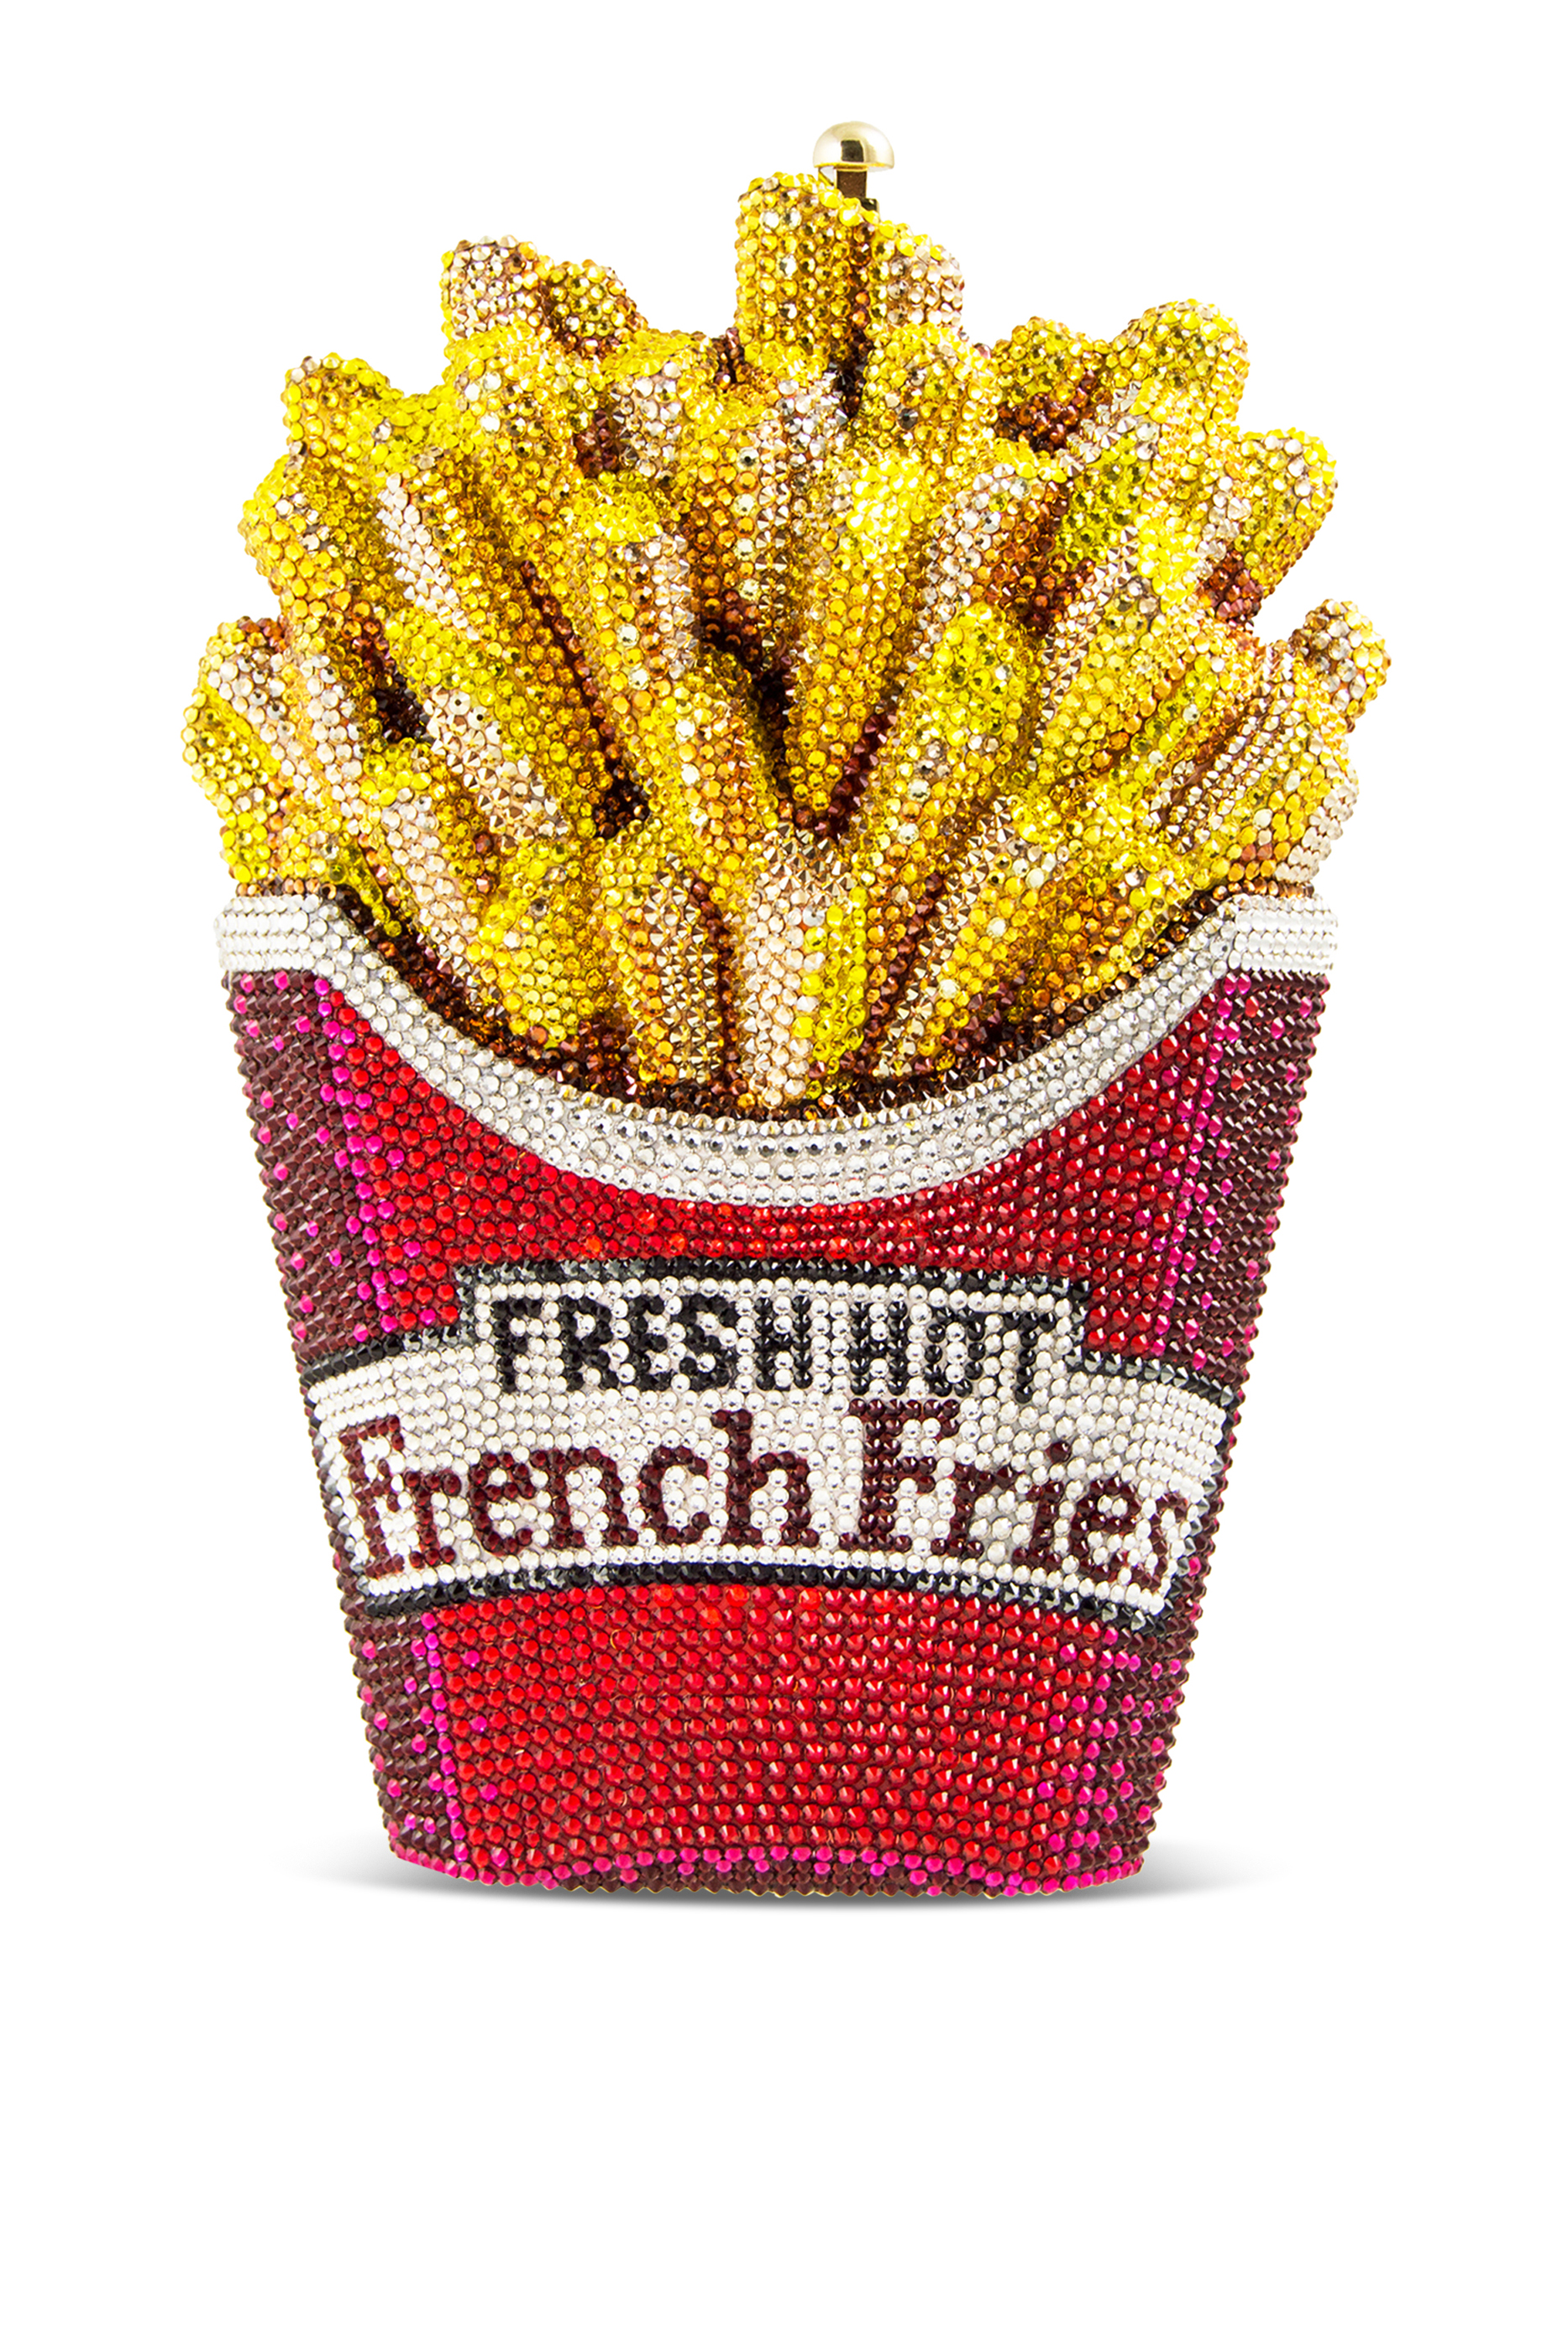 Judith Leiber Couture French Fries Rainbow Clutch Bag